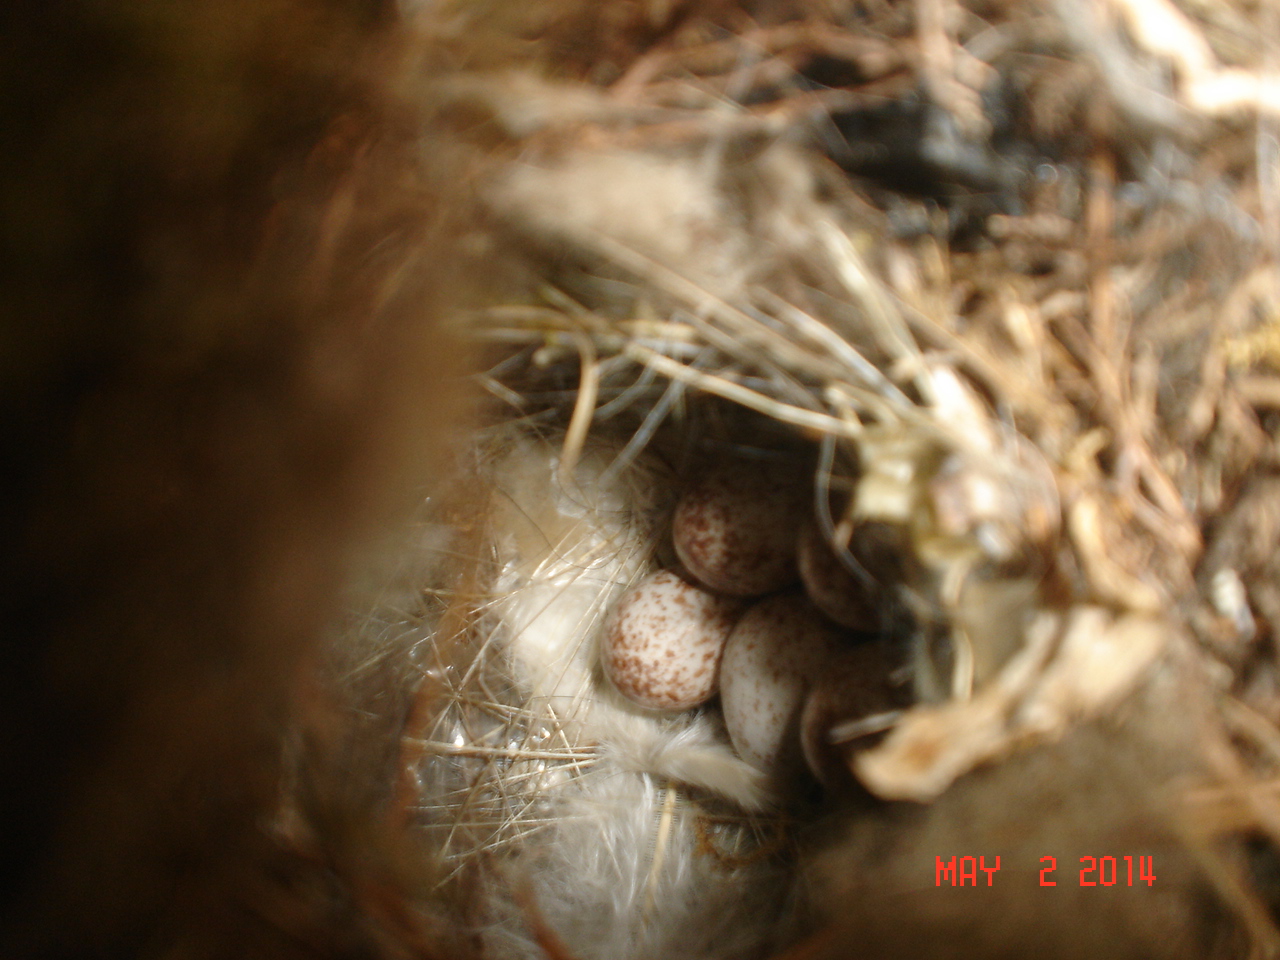 A different kind of egg :) A house wren built a nest on my porch!